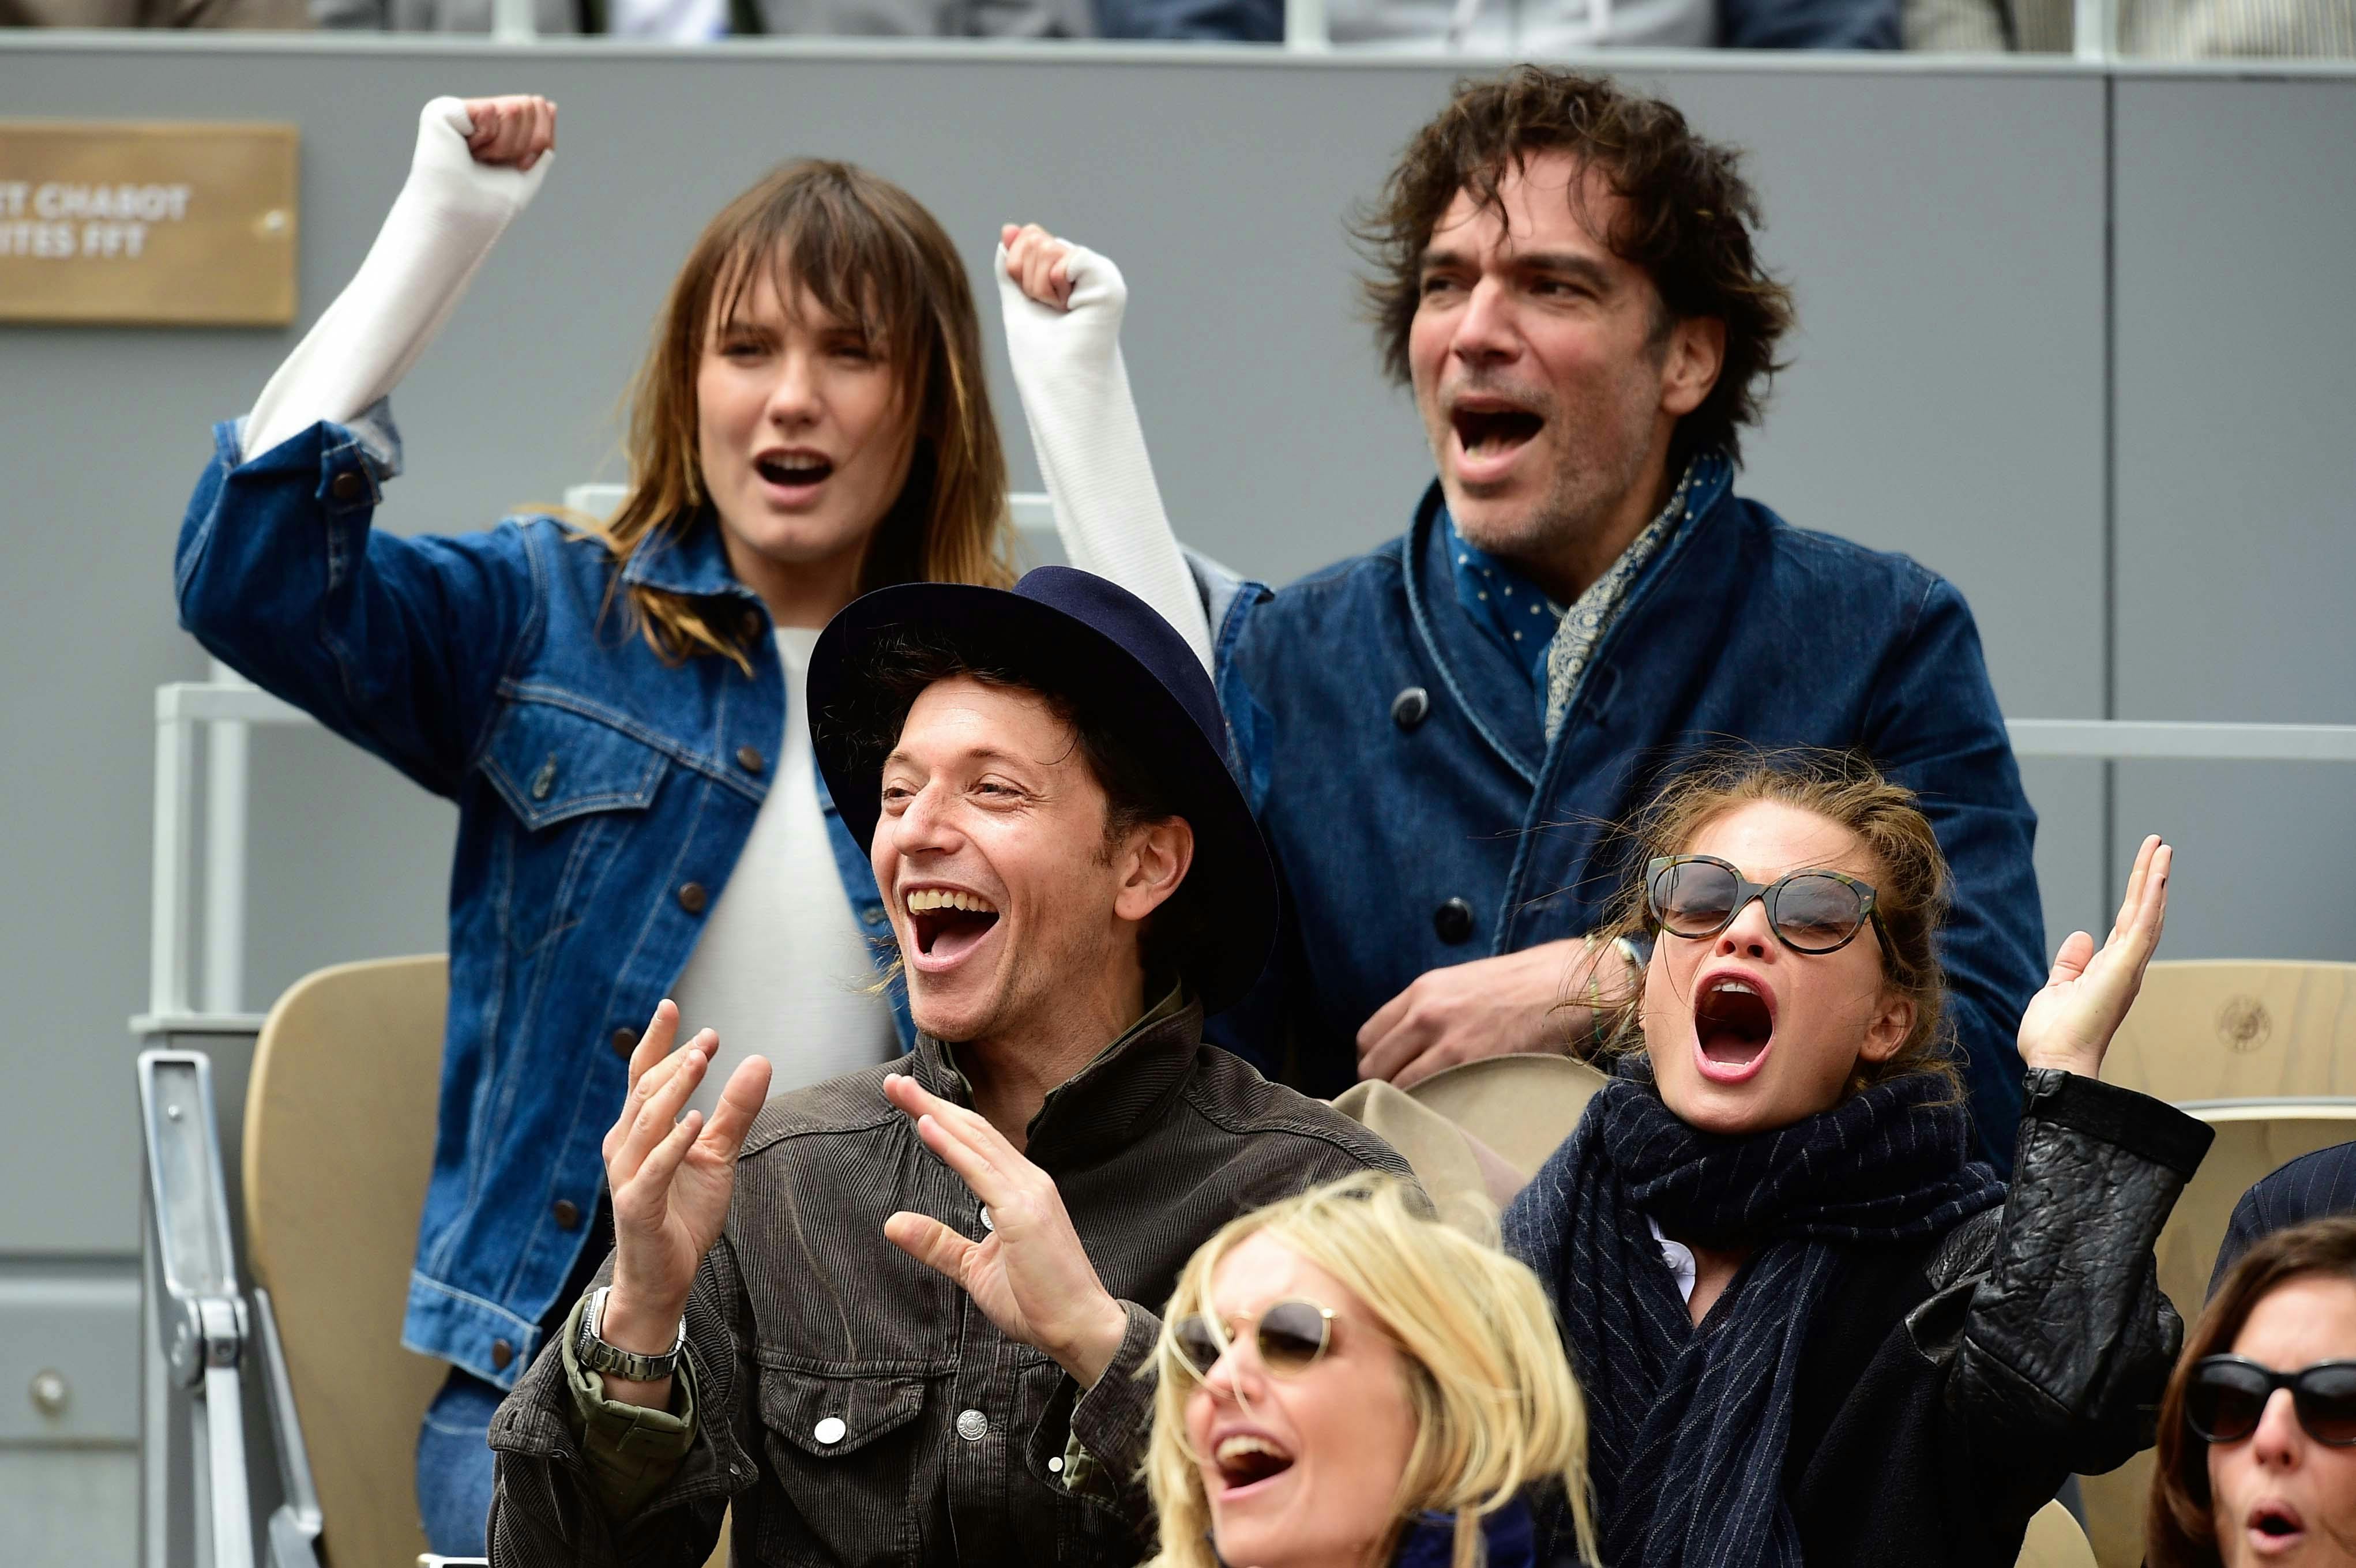 French singer Raphaël, French actresses Mélanie Laurent and Ana Girardot Roland-Garros 2019